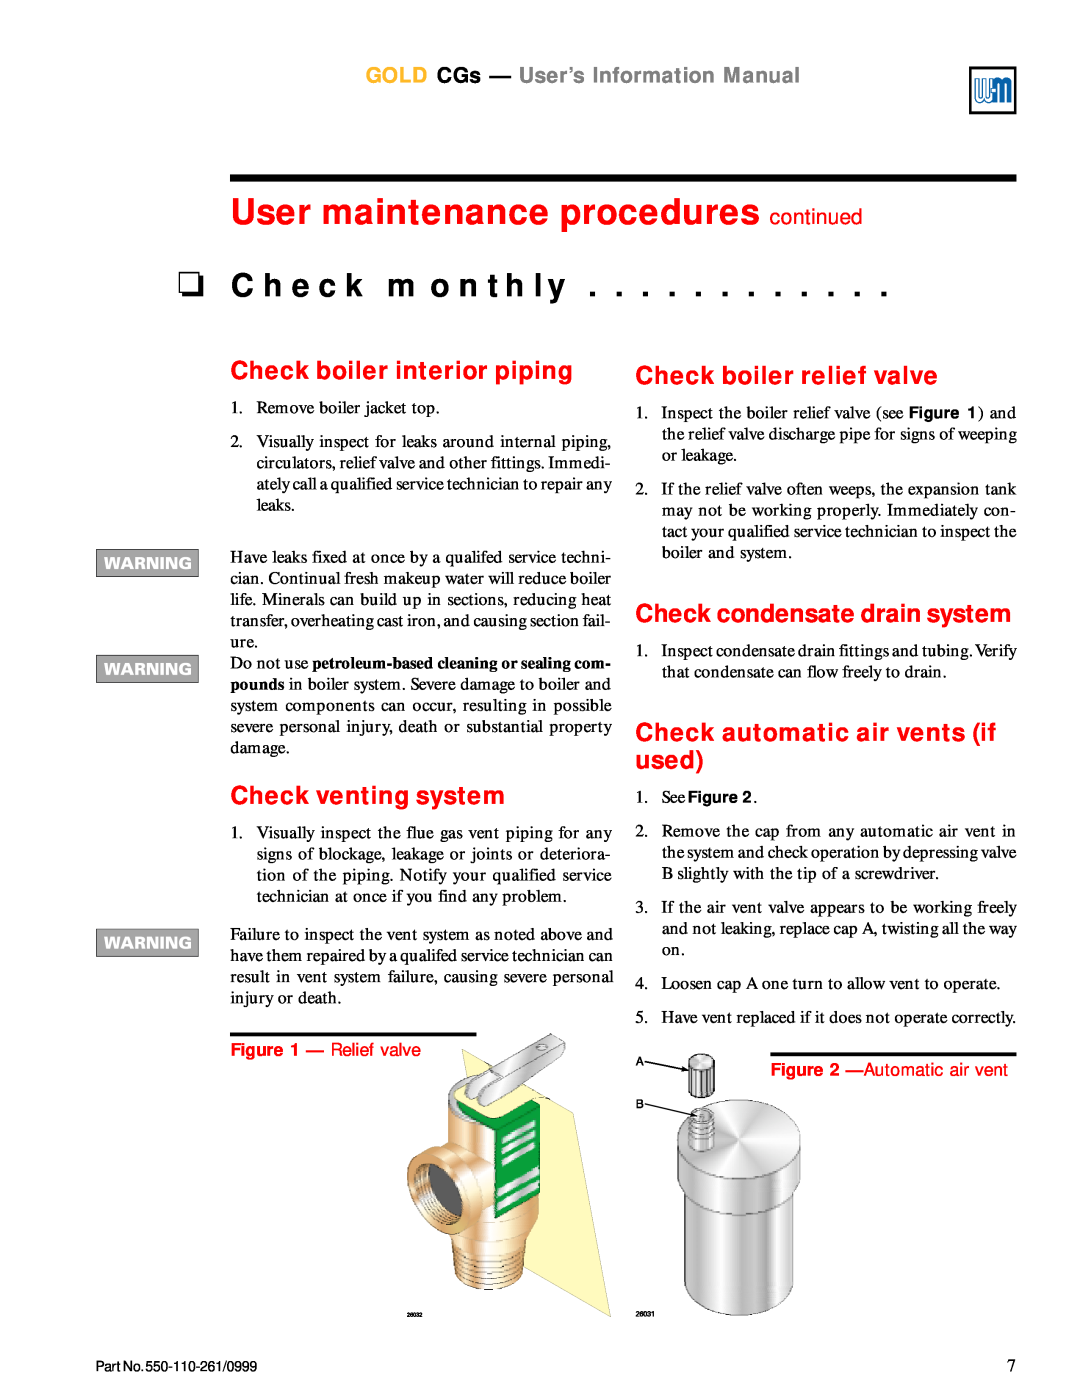 Weil-McLain GOLD CGs User maintenance procedures continued, Check monthly, Check boiler interior piping, Relief valve 